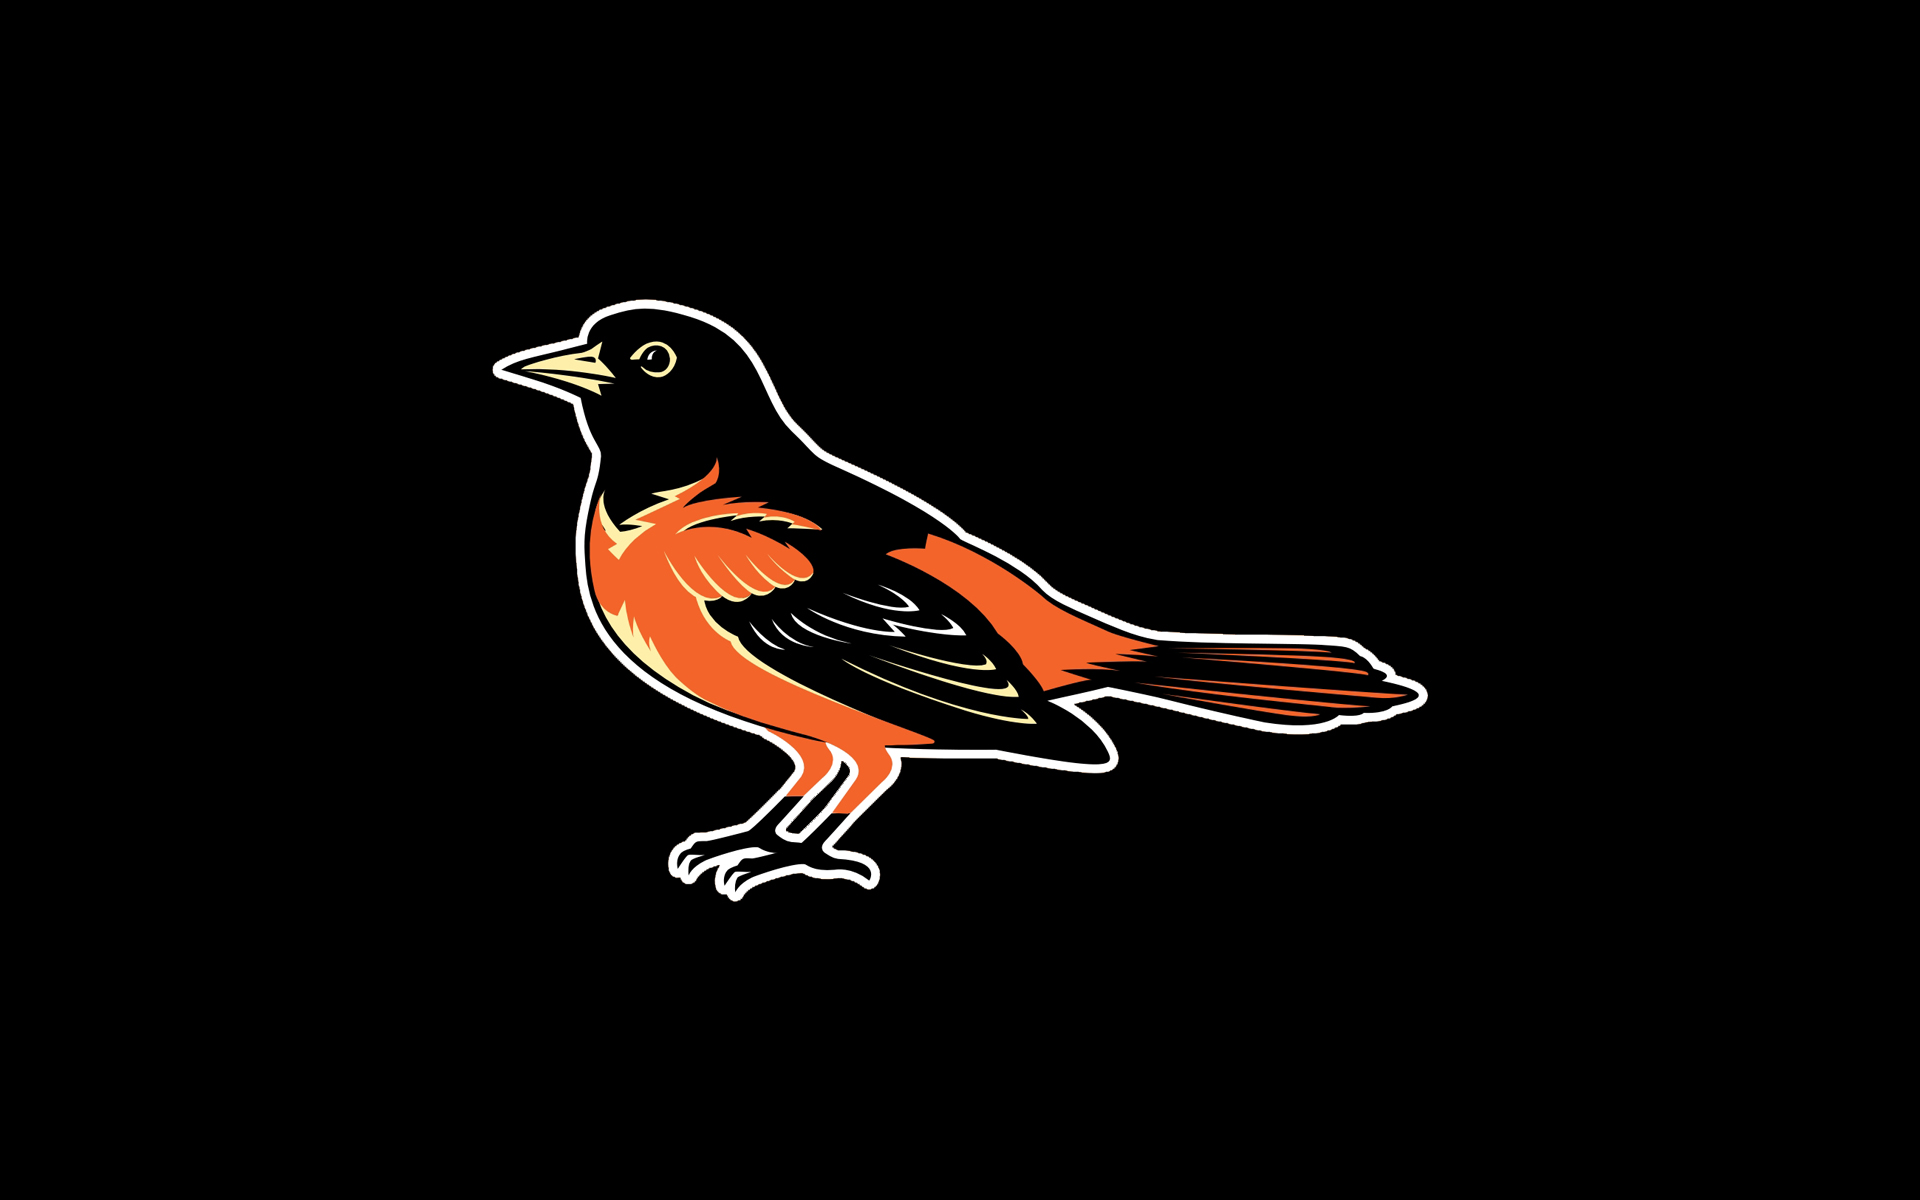 44+] Ravens and Orioles Wallpaper on WallpaperSafari  Orioles wallpaper,  Cute anime wallpaper, Baltimore orioles wallpaper